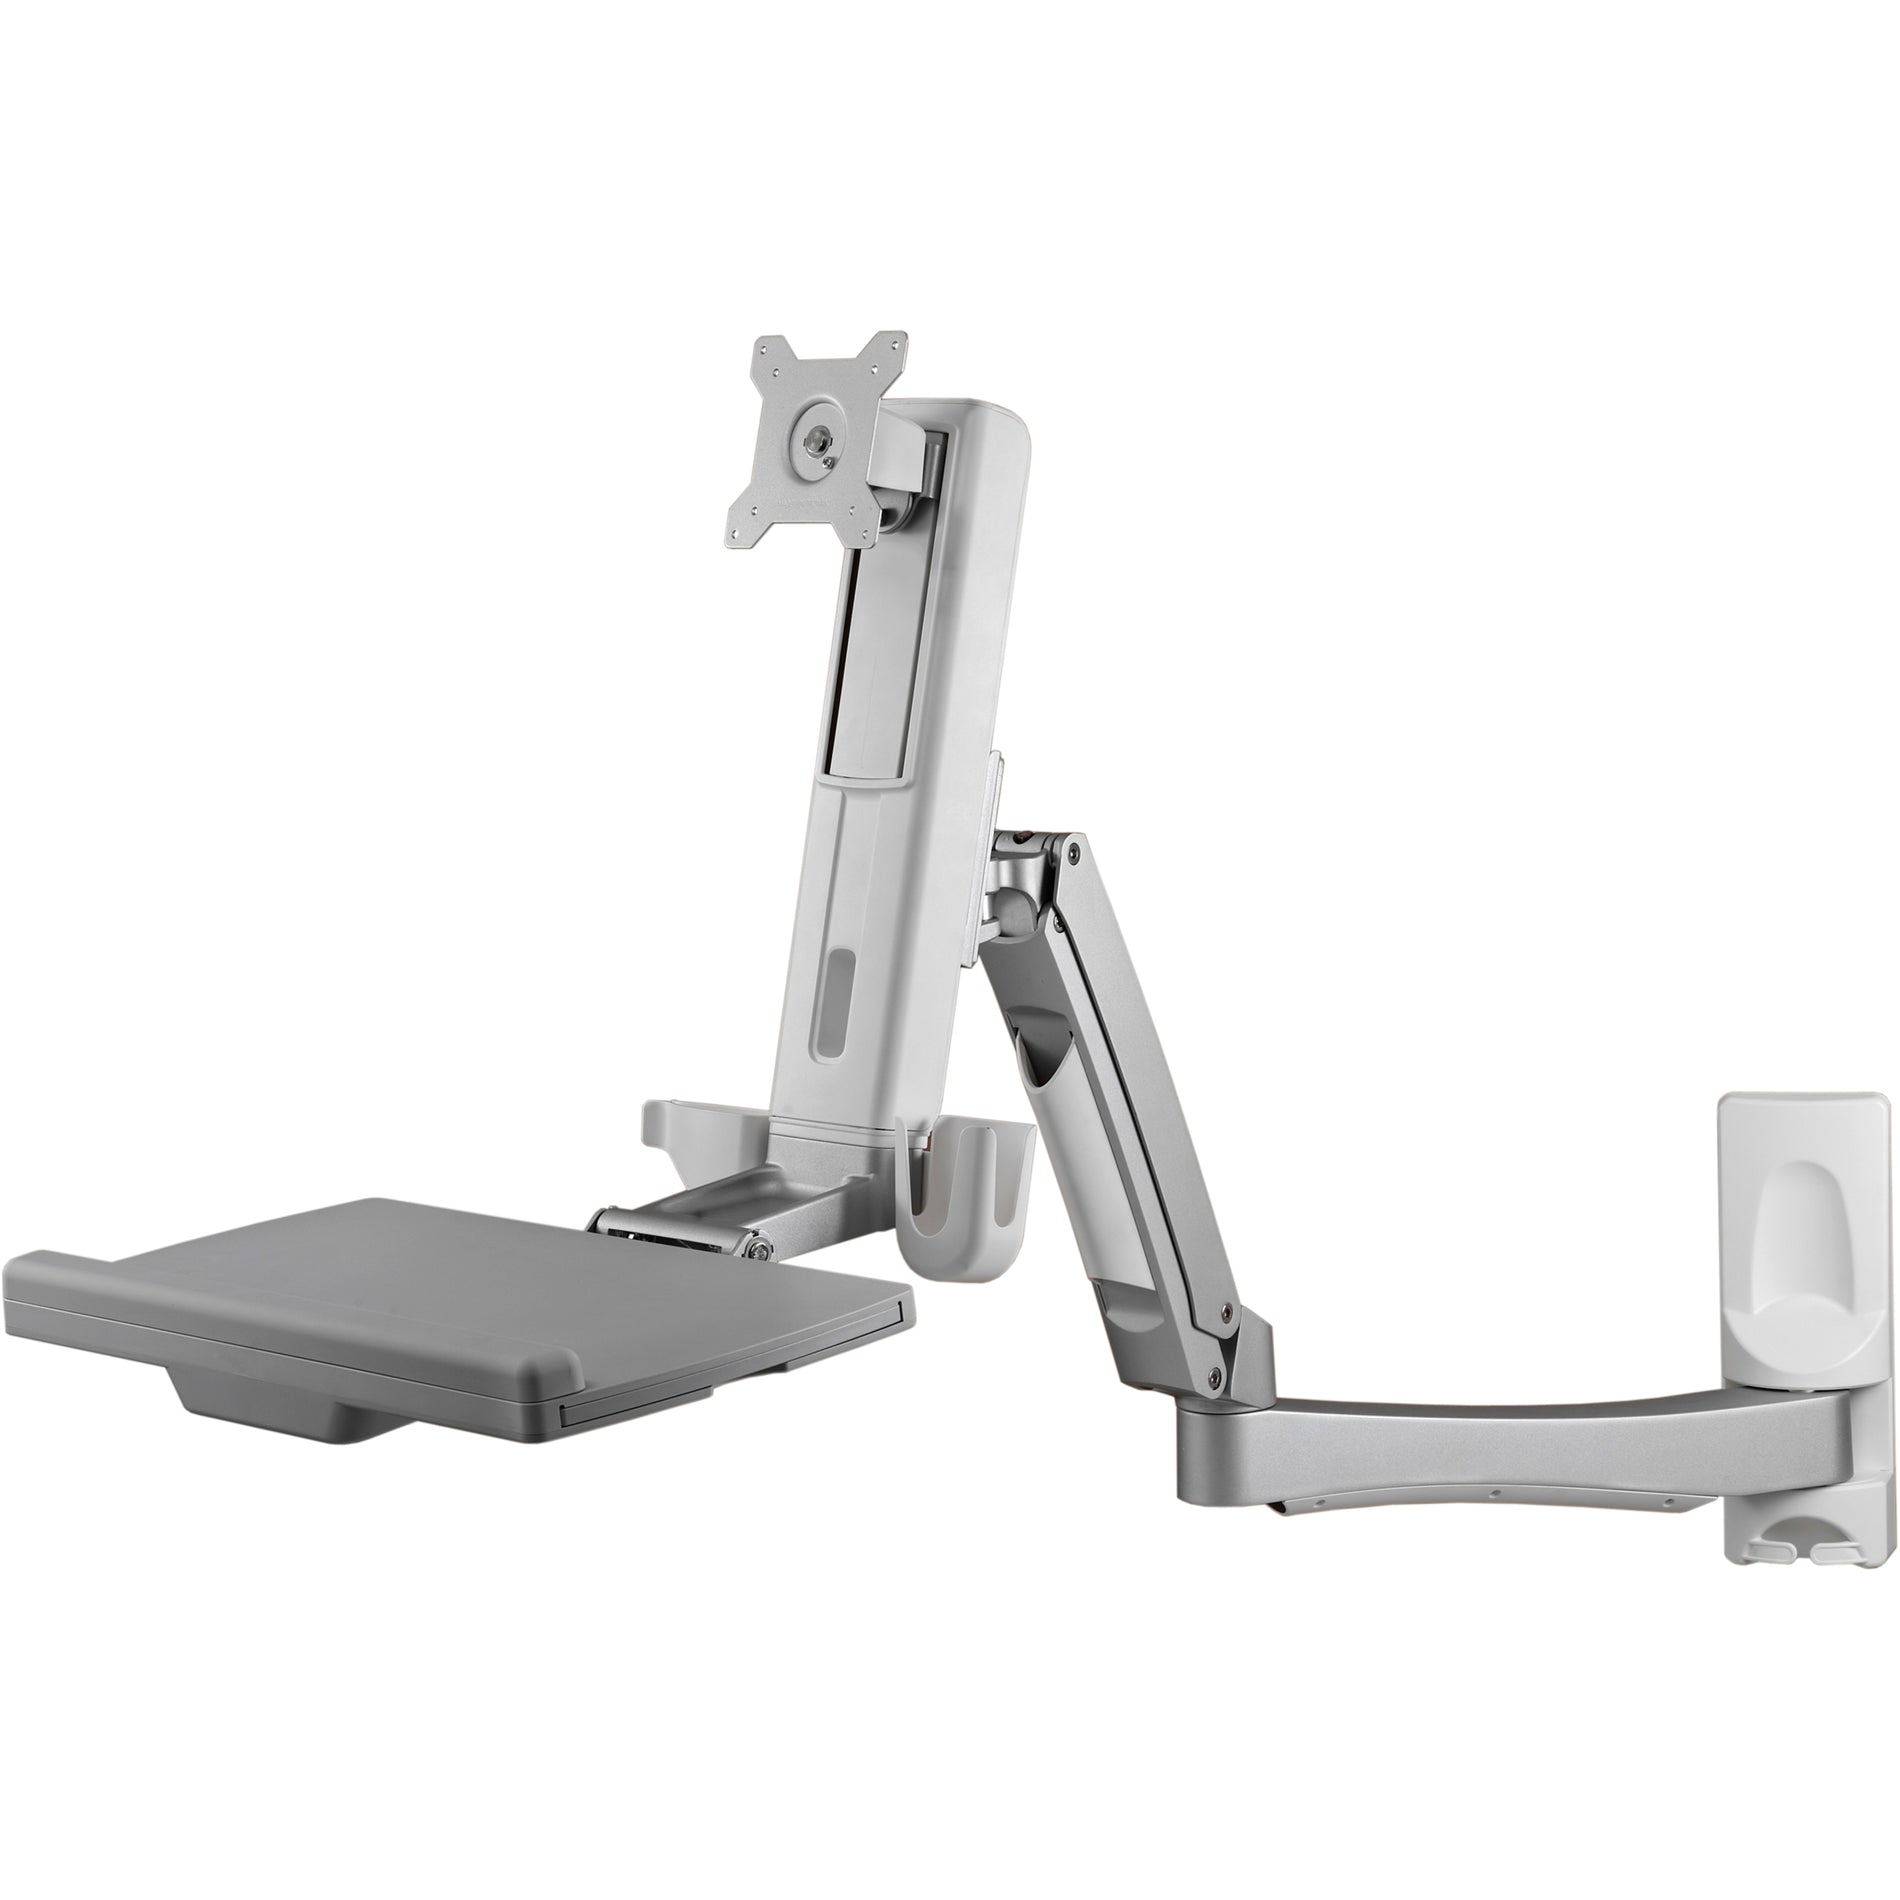 Amer AMR1AWSL Sit-Stand Swing Arm Wall Mount Computer Workstation System, Keyboard, Monitor, Mouse, 23.15 lb Max Load Capacity, 1 Display Supported, 24" Max Screen Size